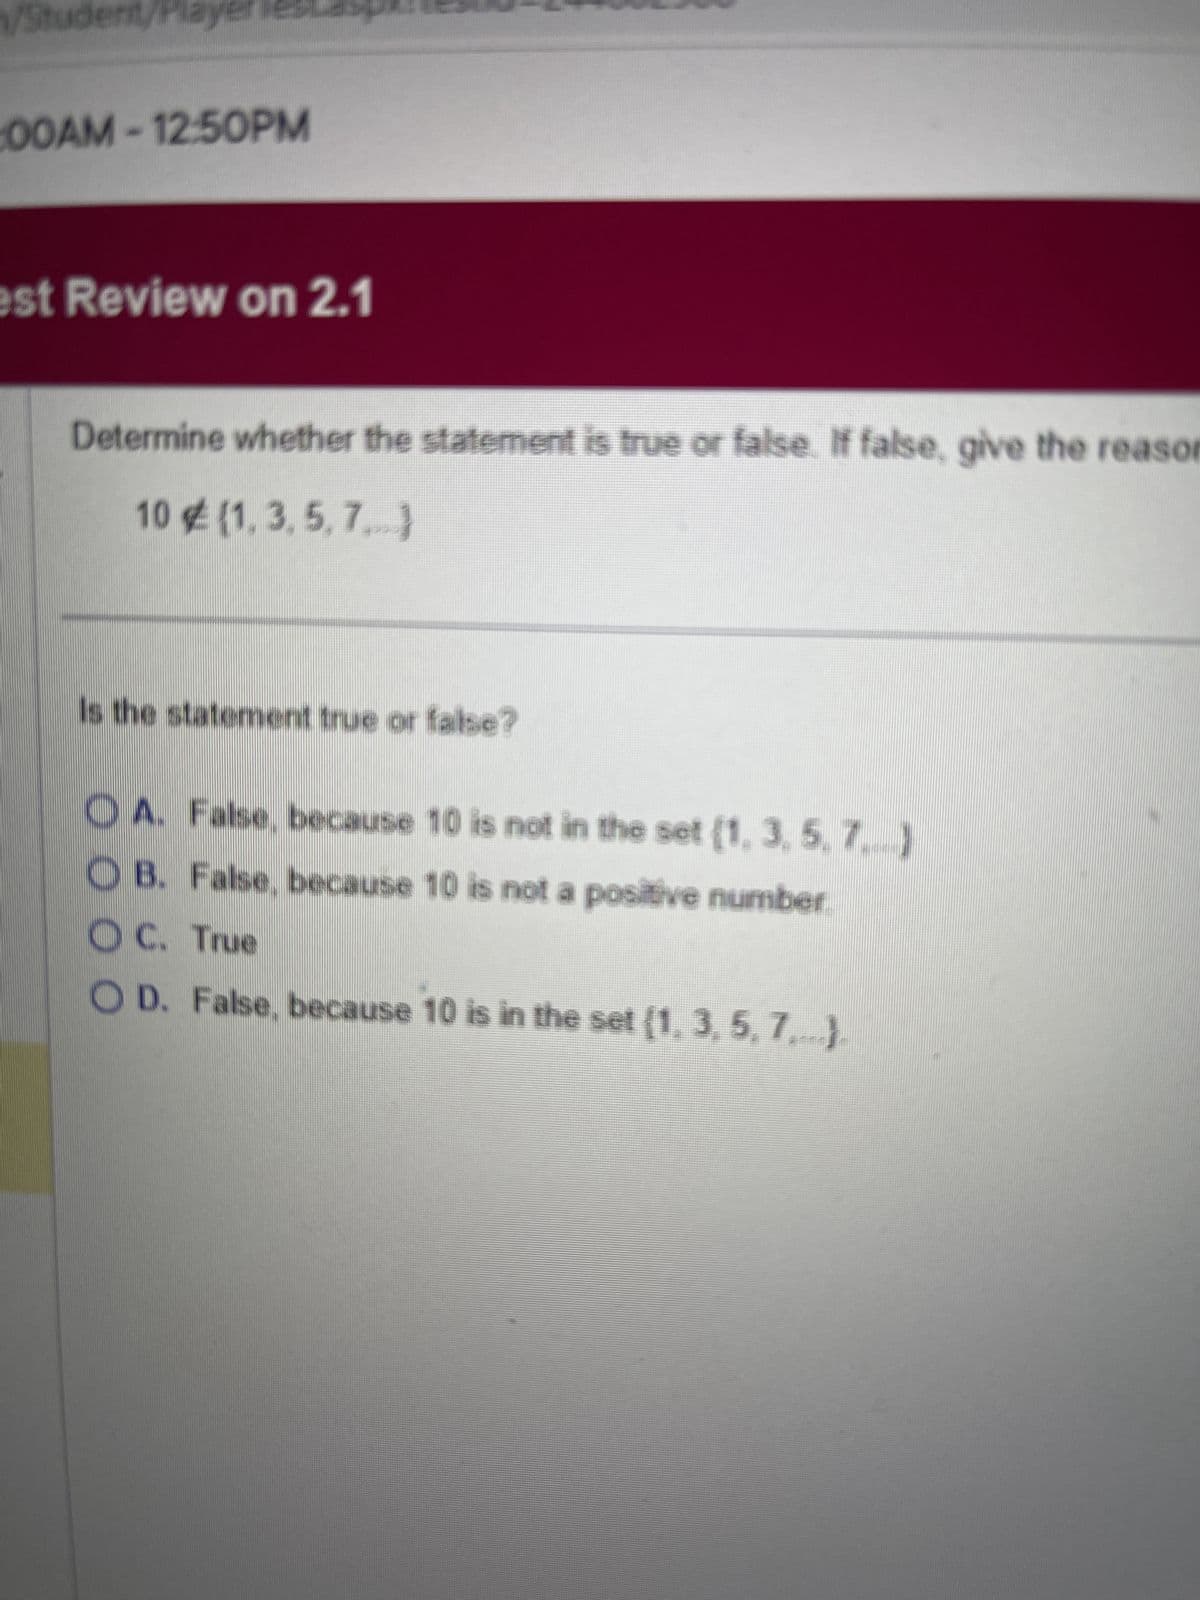 Student/Player
00AM-12:50PM
est Review on 2.1
Determine whether the statement is true or false. If false, give the reason
10 € (1,3,5,7)
Is the statement true or false?
A. False, because 10 is not in the set (1, 3, 5, 7.)
OB. False, because 10 is not a positive number.
OC. True
OD. False, because 10 is in the set (1, 3, 5, 7,...).